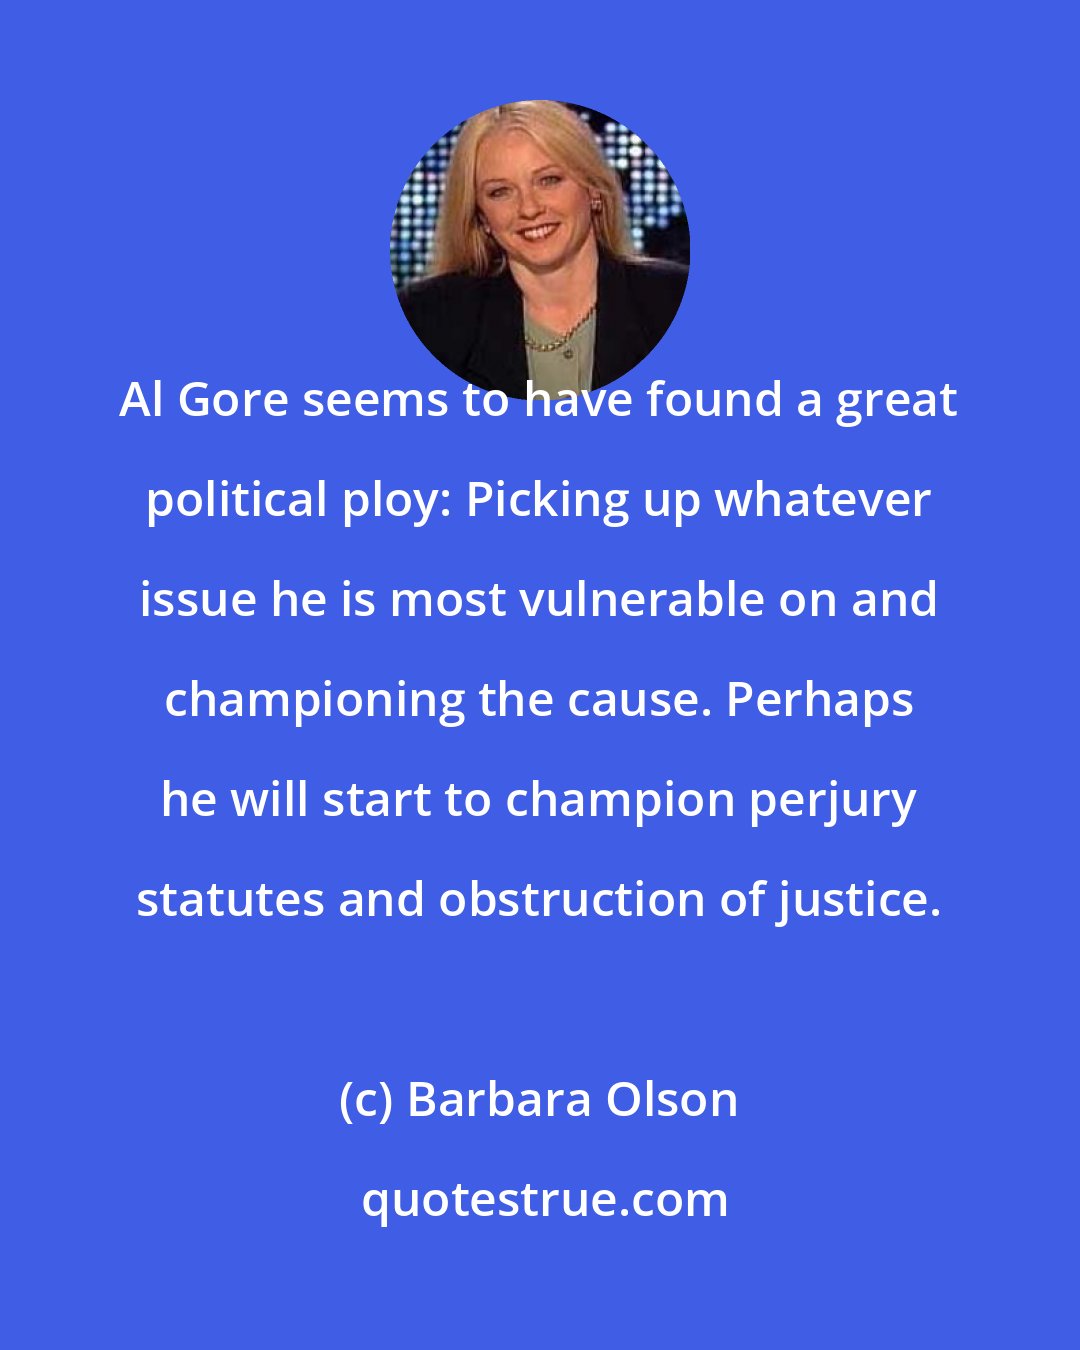 Barbara Olson: Al Gore seems to have found a great political ploy: Picking up whatever issue he is most vulnerable on and championing the cause. Perhaps he will start to champion perjury statutes and obstruction of justice.